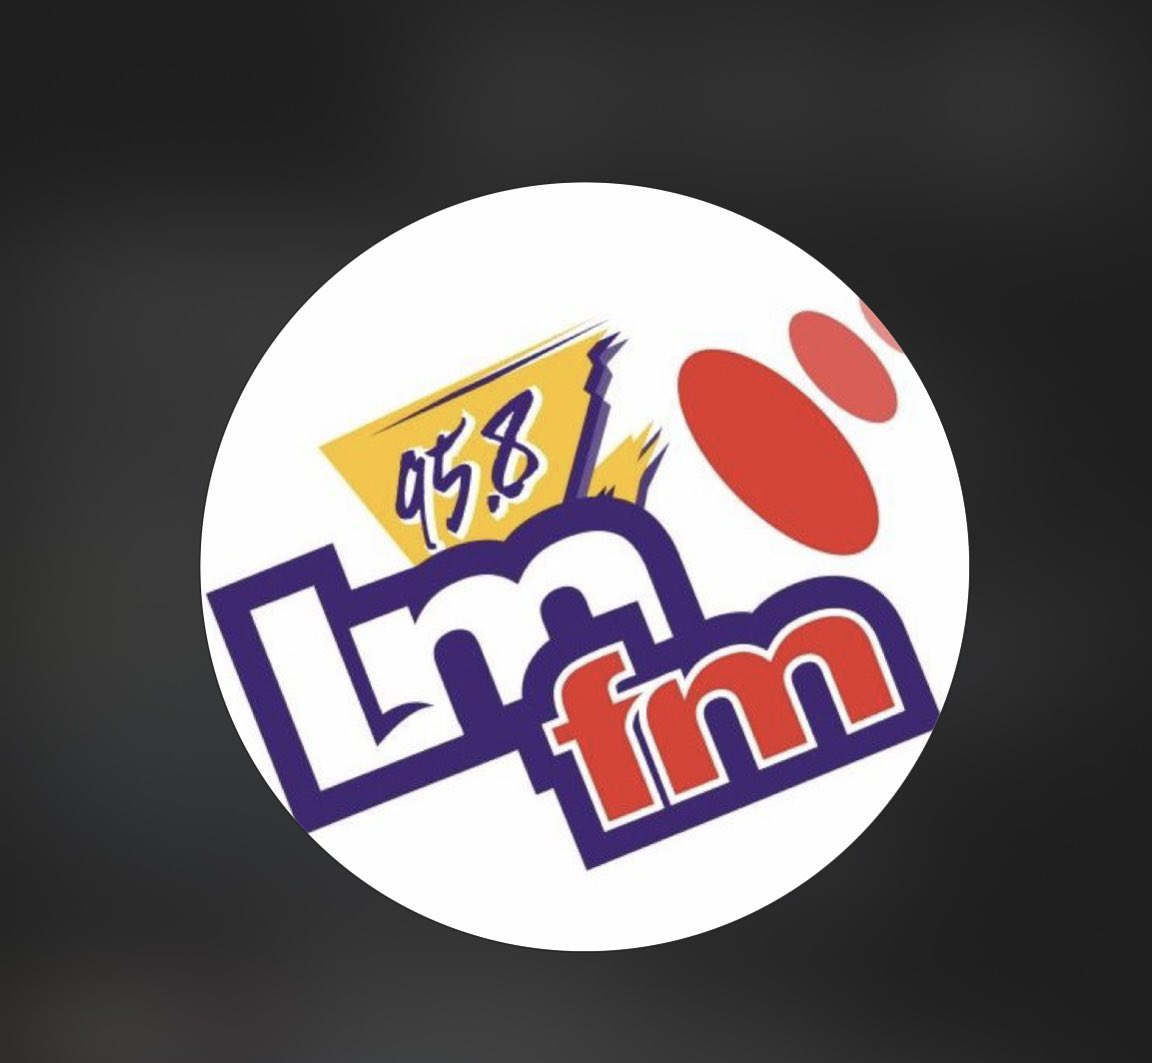 Howdy! I’ll be a guest on tonight’s Clár Smidiríní on the brilliant @LMFMRADIO at 8pm. Tune in if you want to hear what a singer songwriter who’s eaten her own body weight in Easter eggs sounds like 🐣